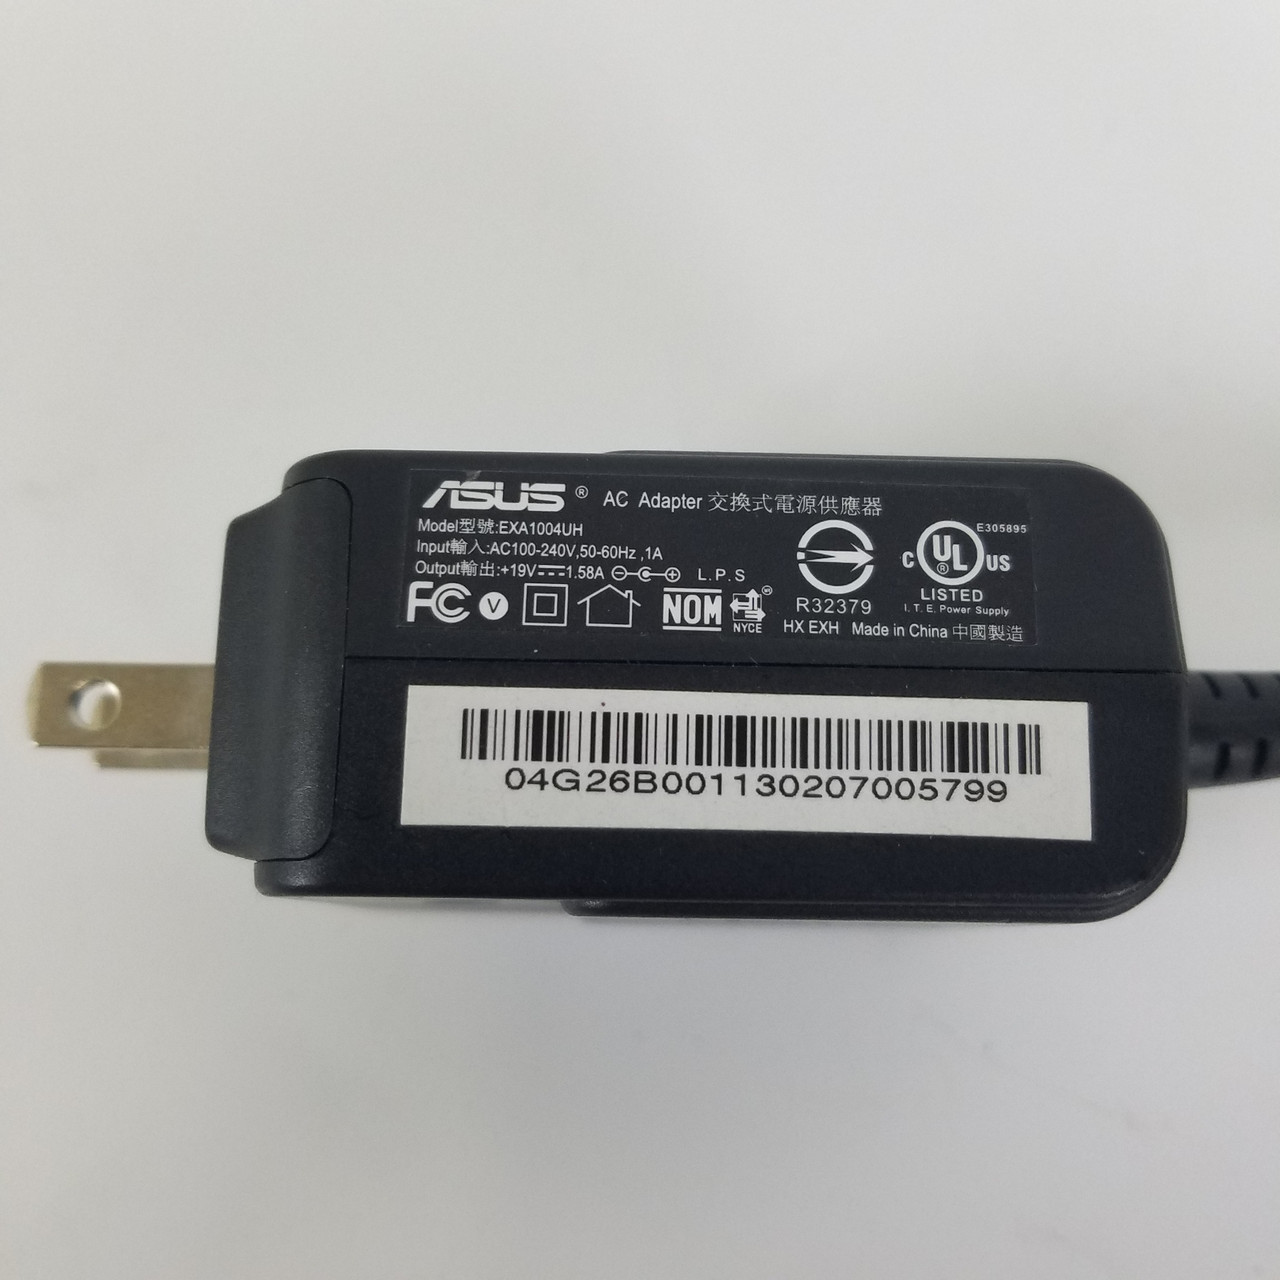 Asus 30W AC Adapter EXA1004UH 19V 1.58A 2.5mm